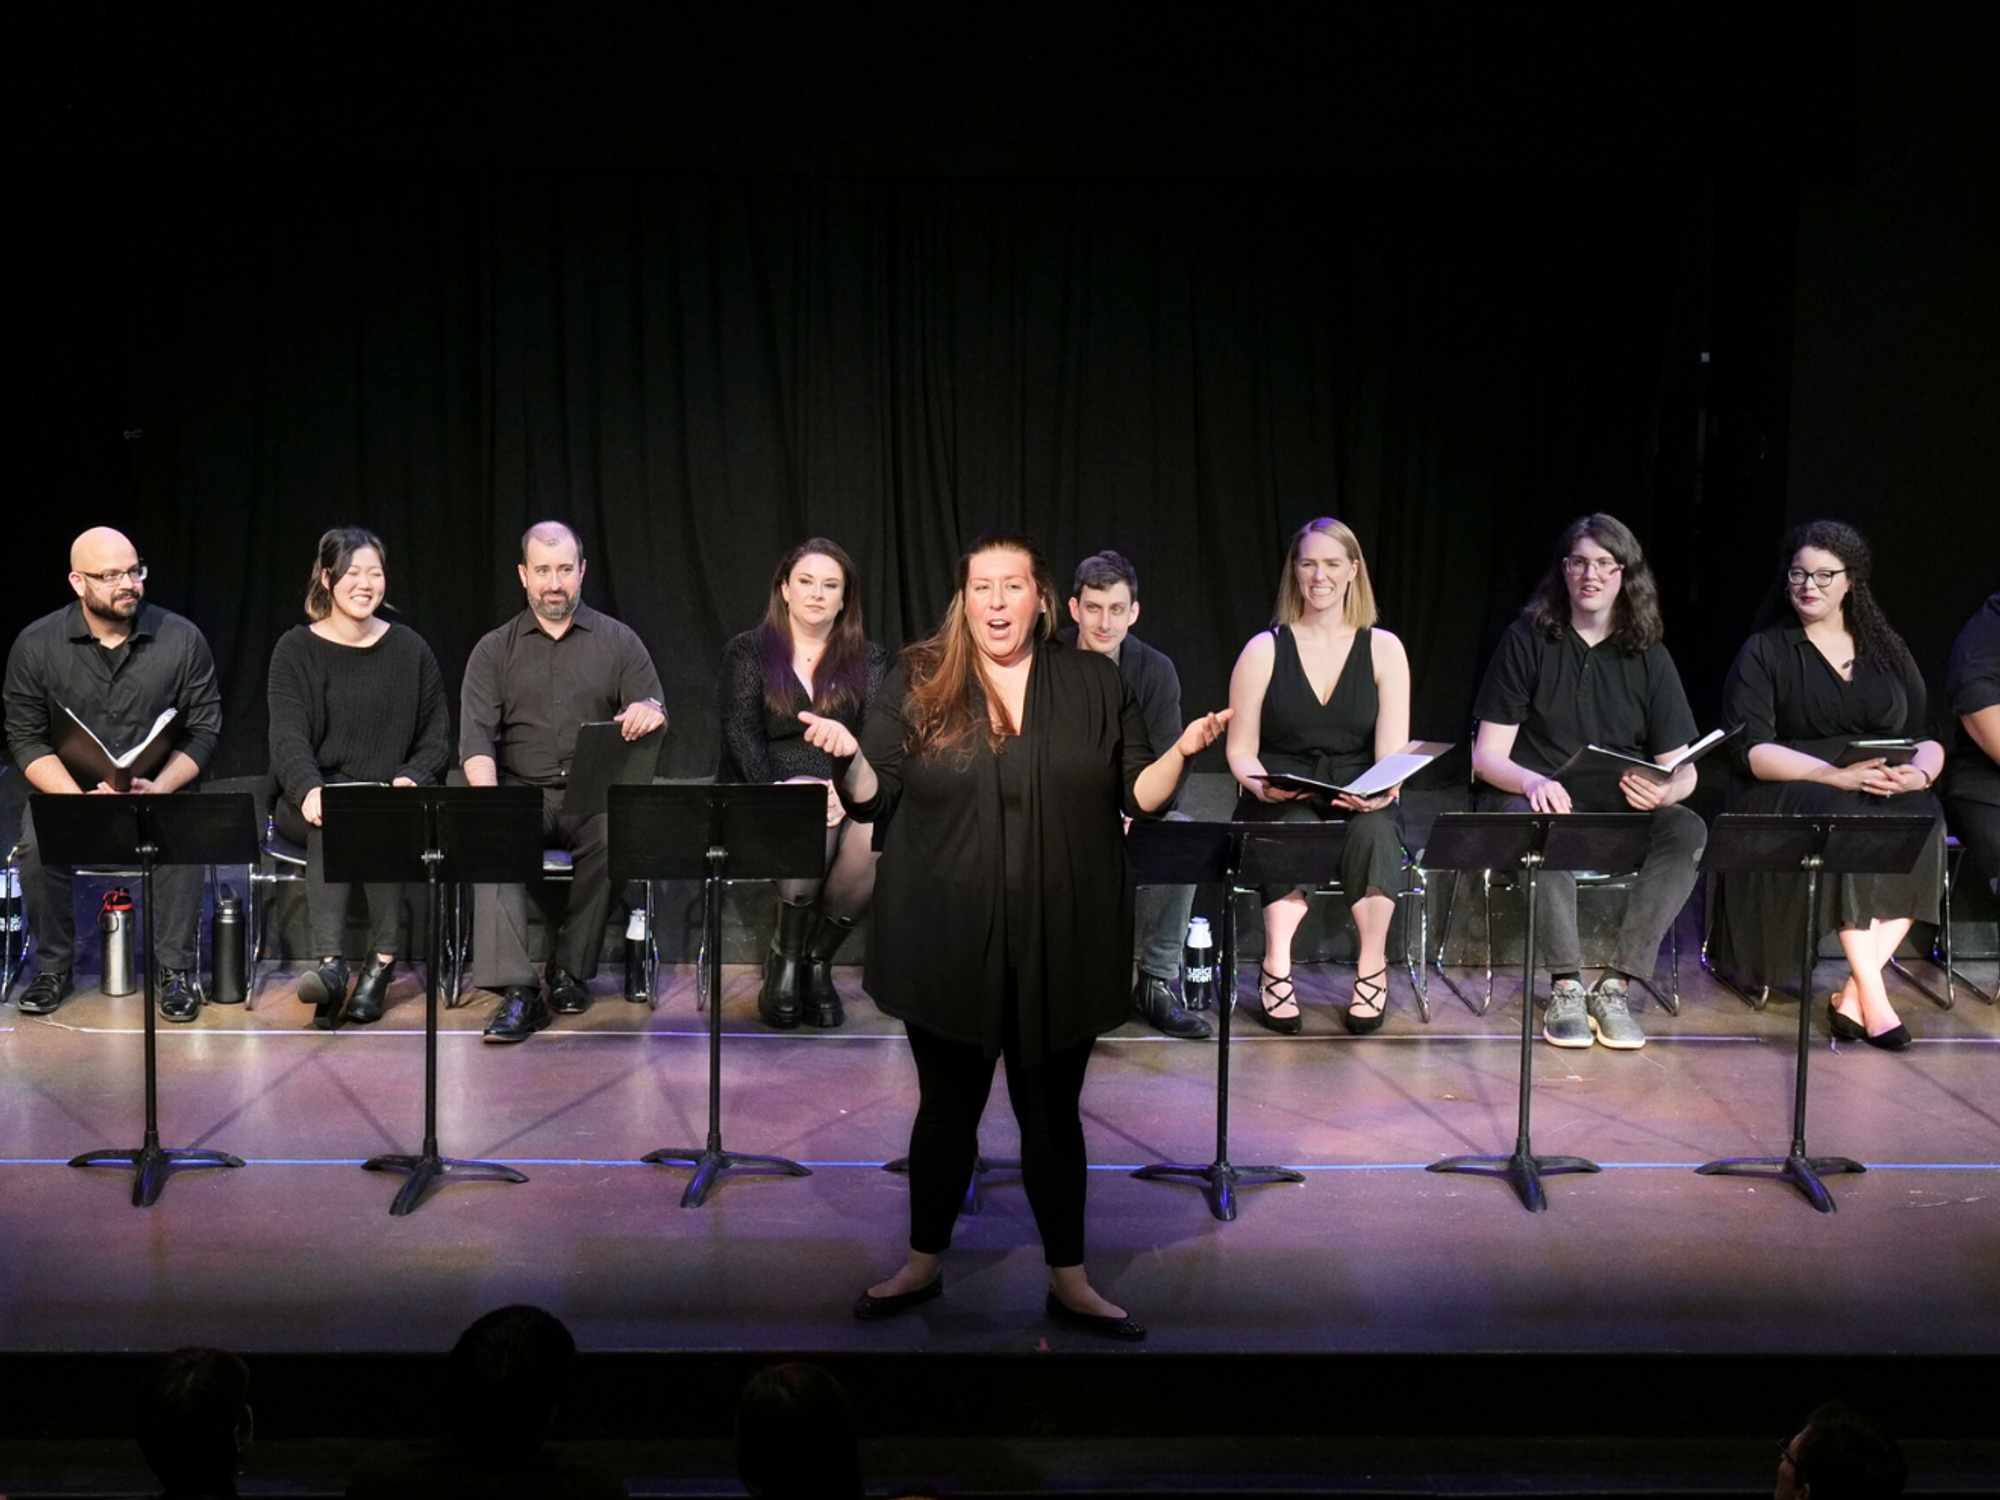 Rebecca Lowrey staged reading